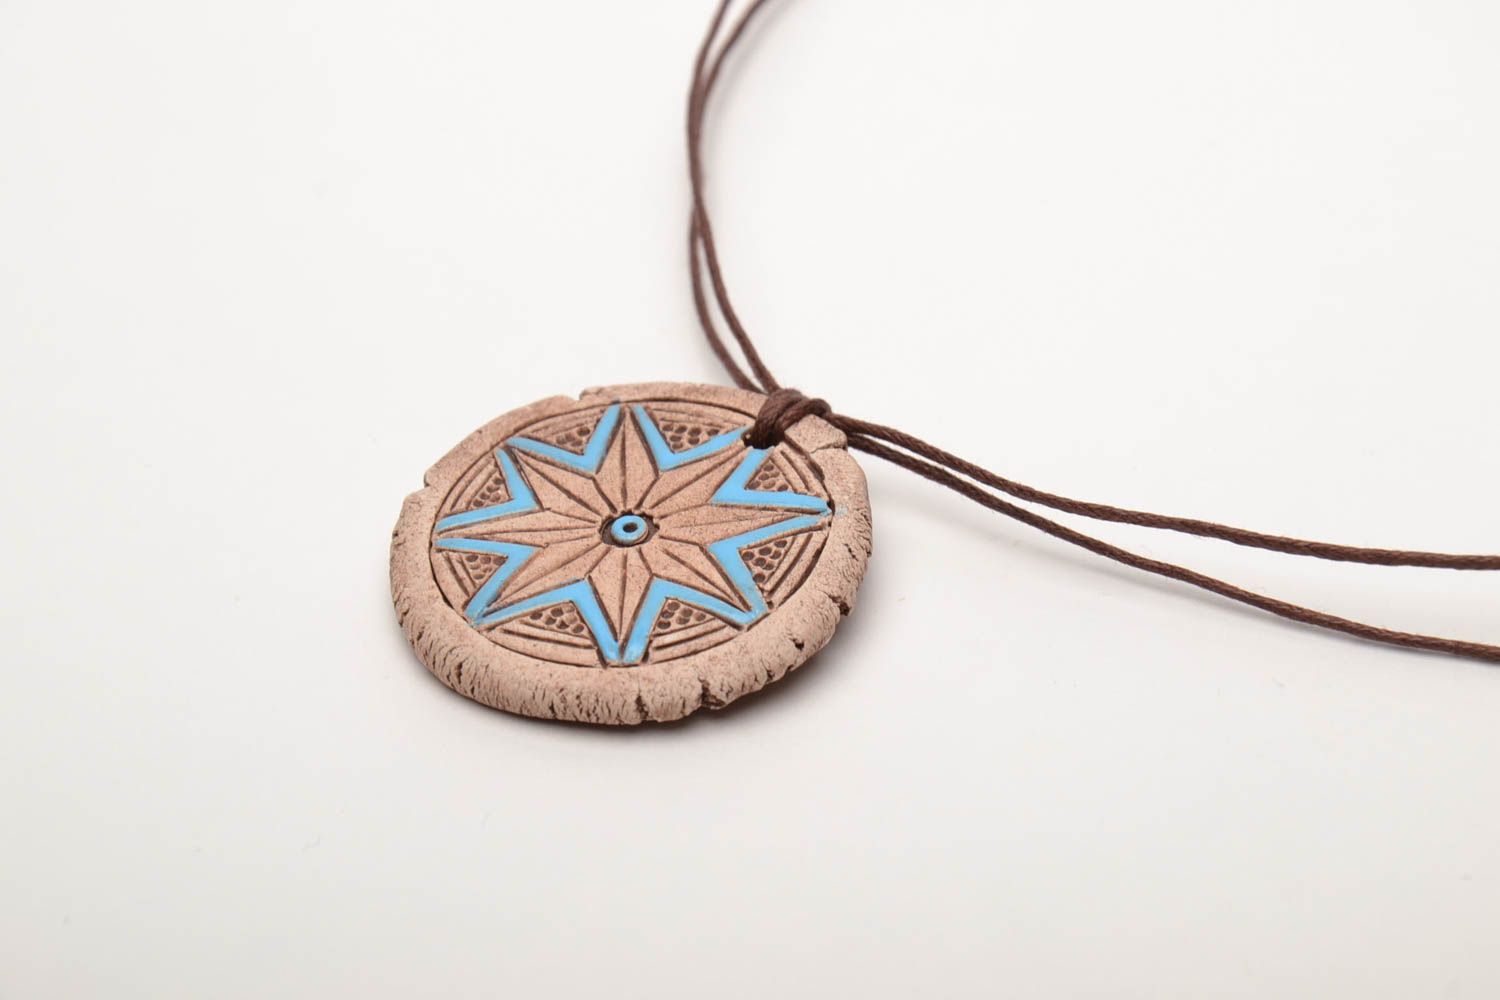 Ceramic pendant with ornaments in ethnic style photo 4